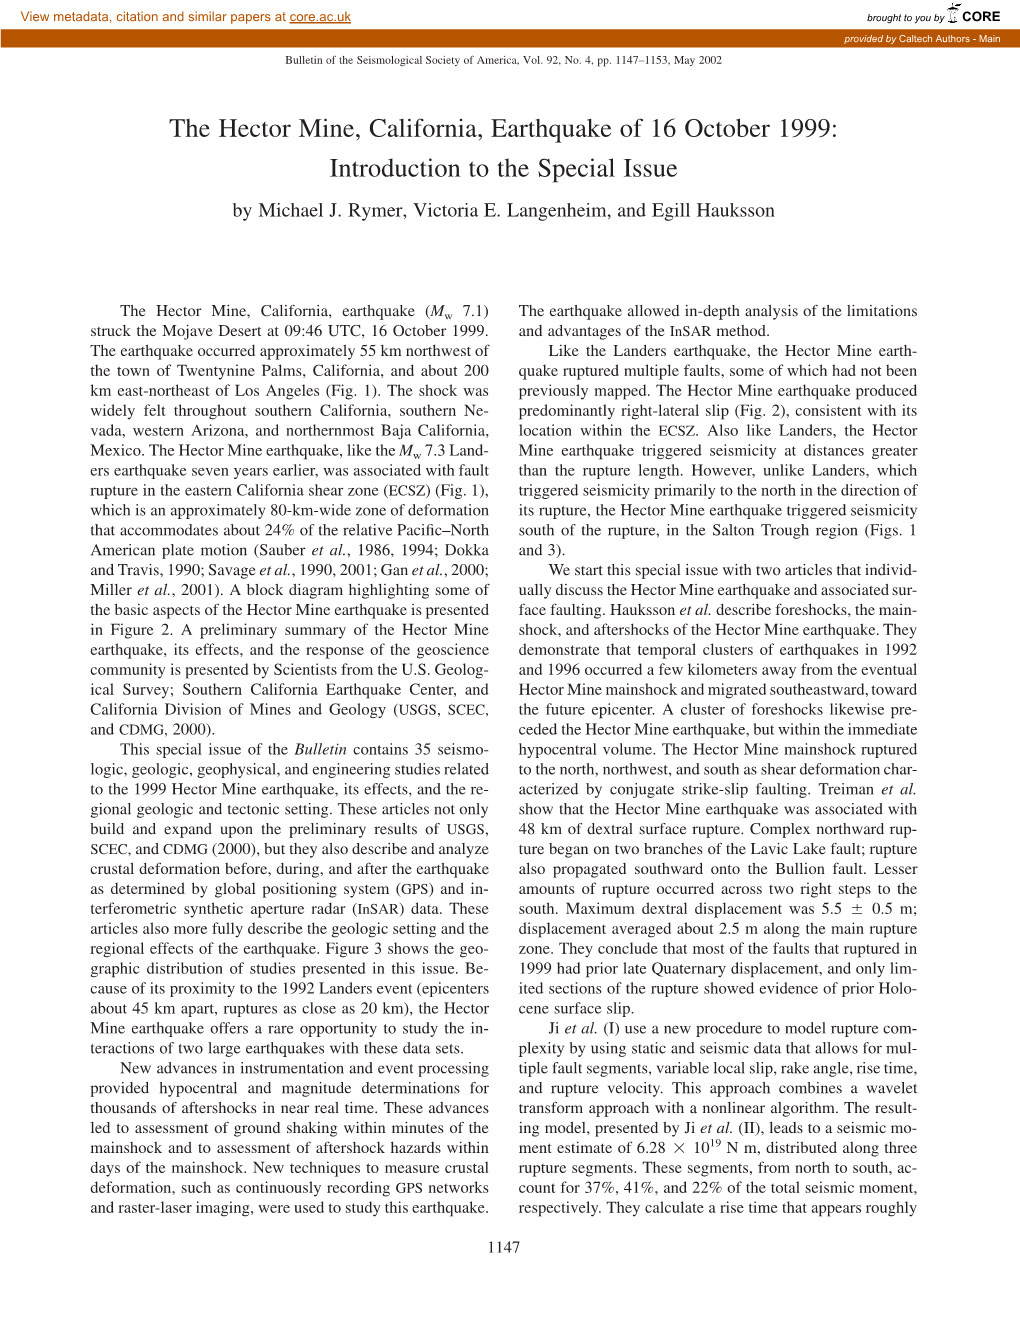 The Hector Mine, California, Earthquake of 16 October 1999: Introduction to the Special Issue by Michael J